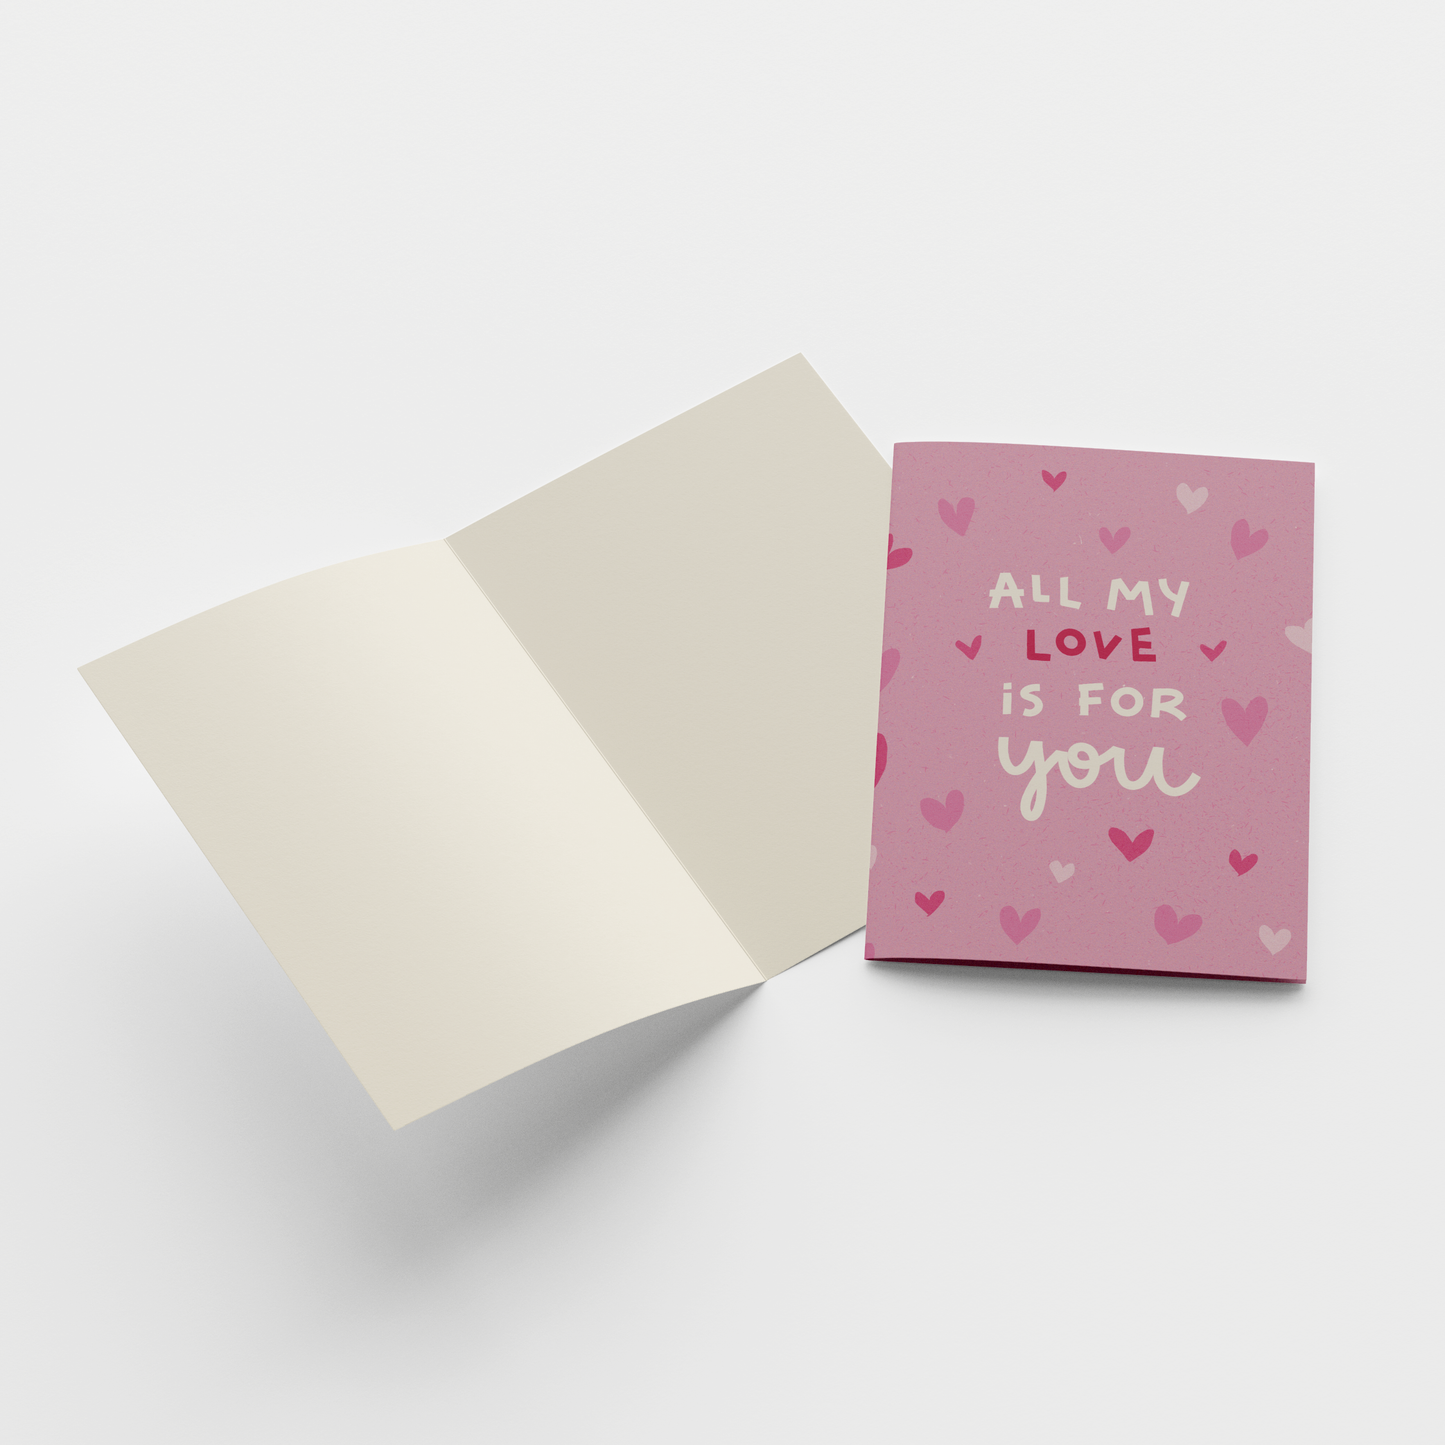 All my love is for you | Mini Greeting Card